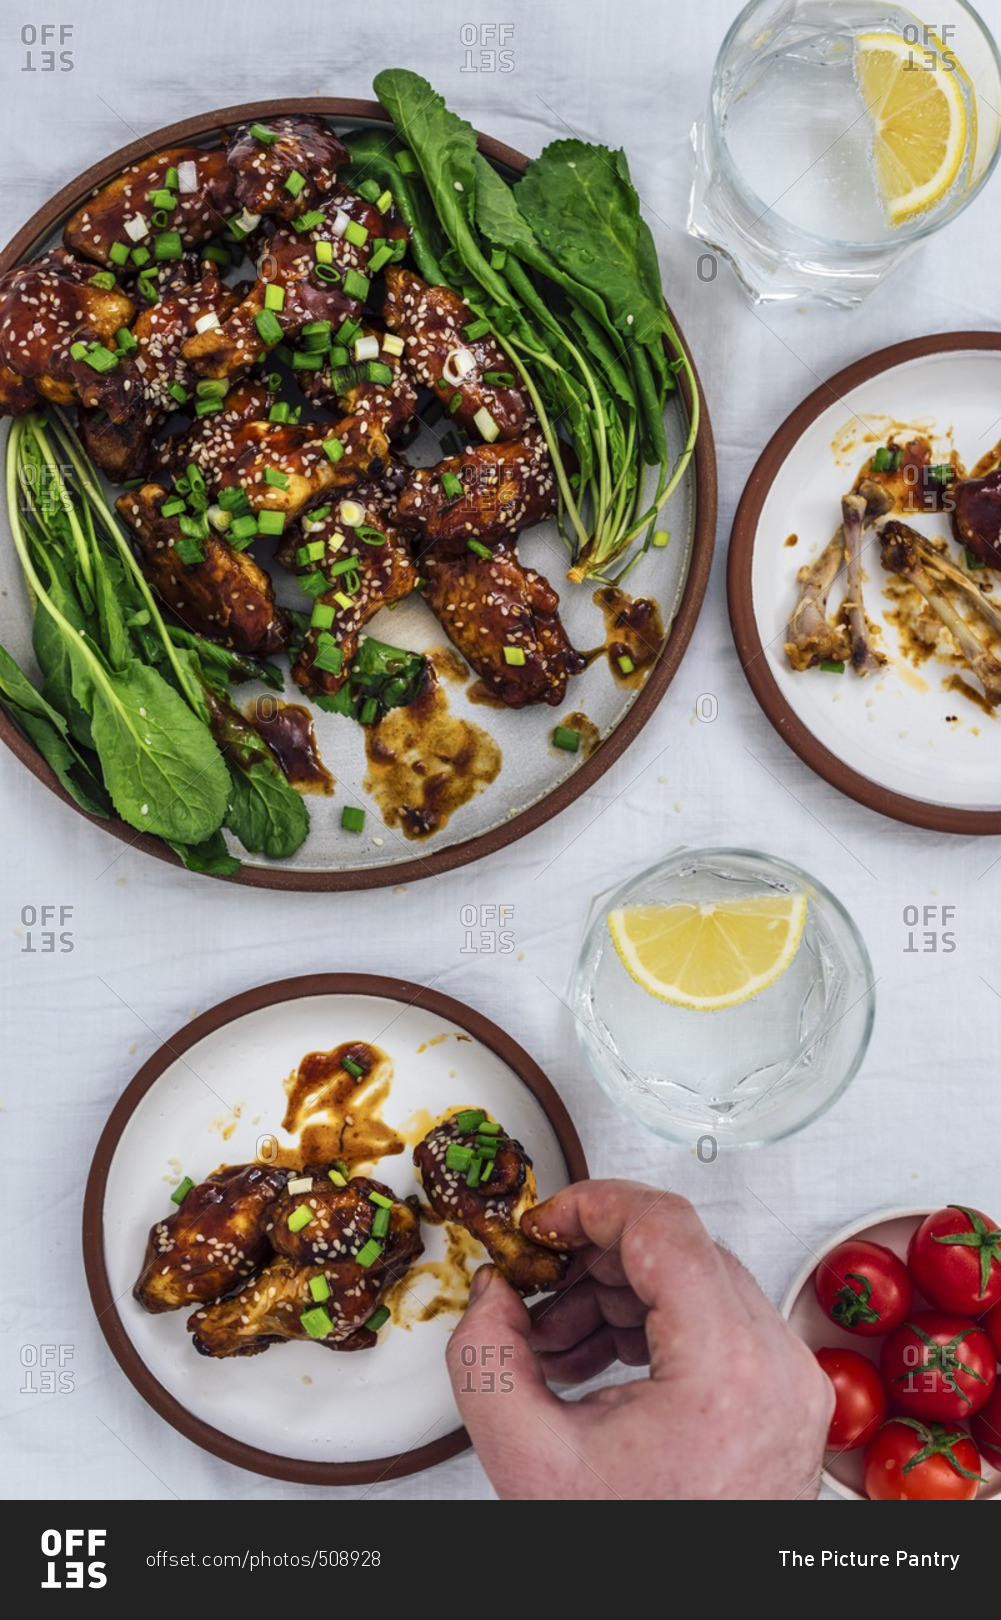 Oven-baked chicken wings with a sticky sauce and sesame seeds served with herbs on one large plate and two small plates accompanied by soda with lemon and cherry tomatoes. A man is grabbing one chicken wing.